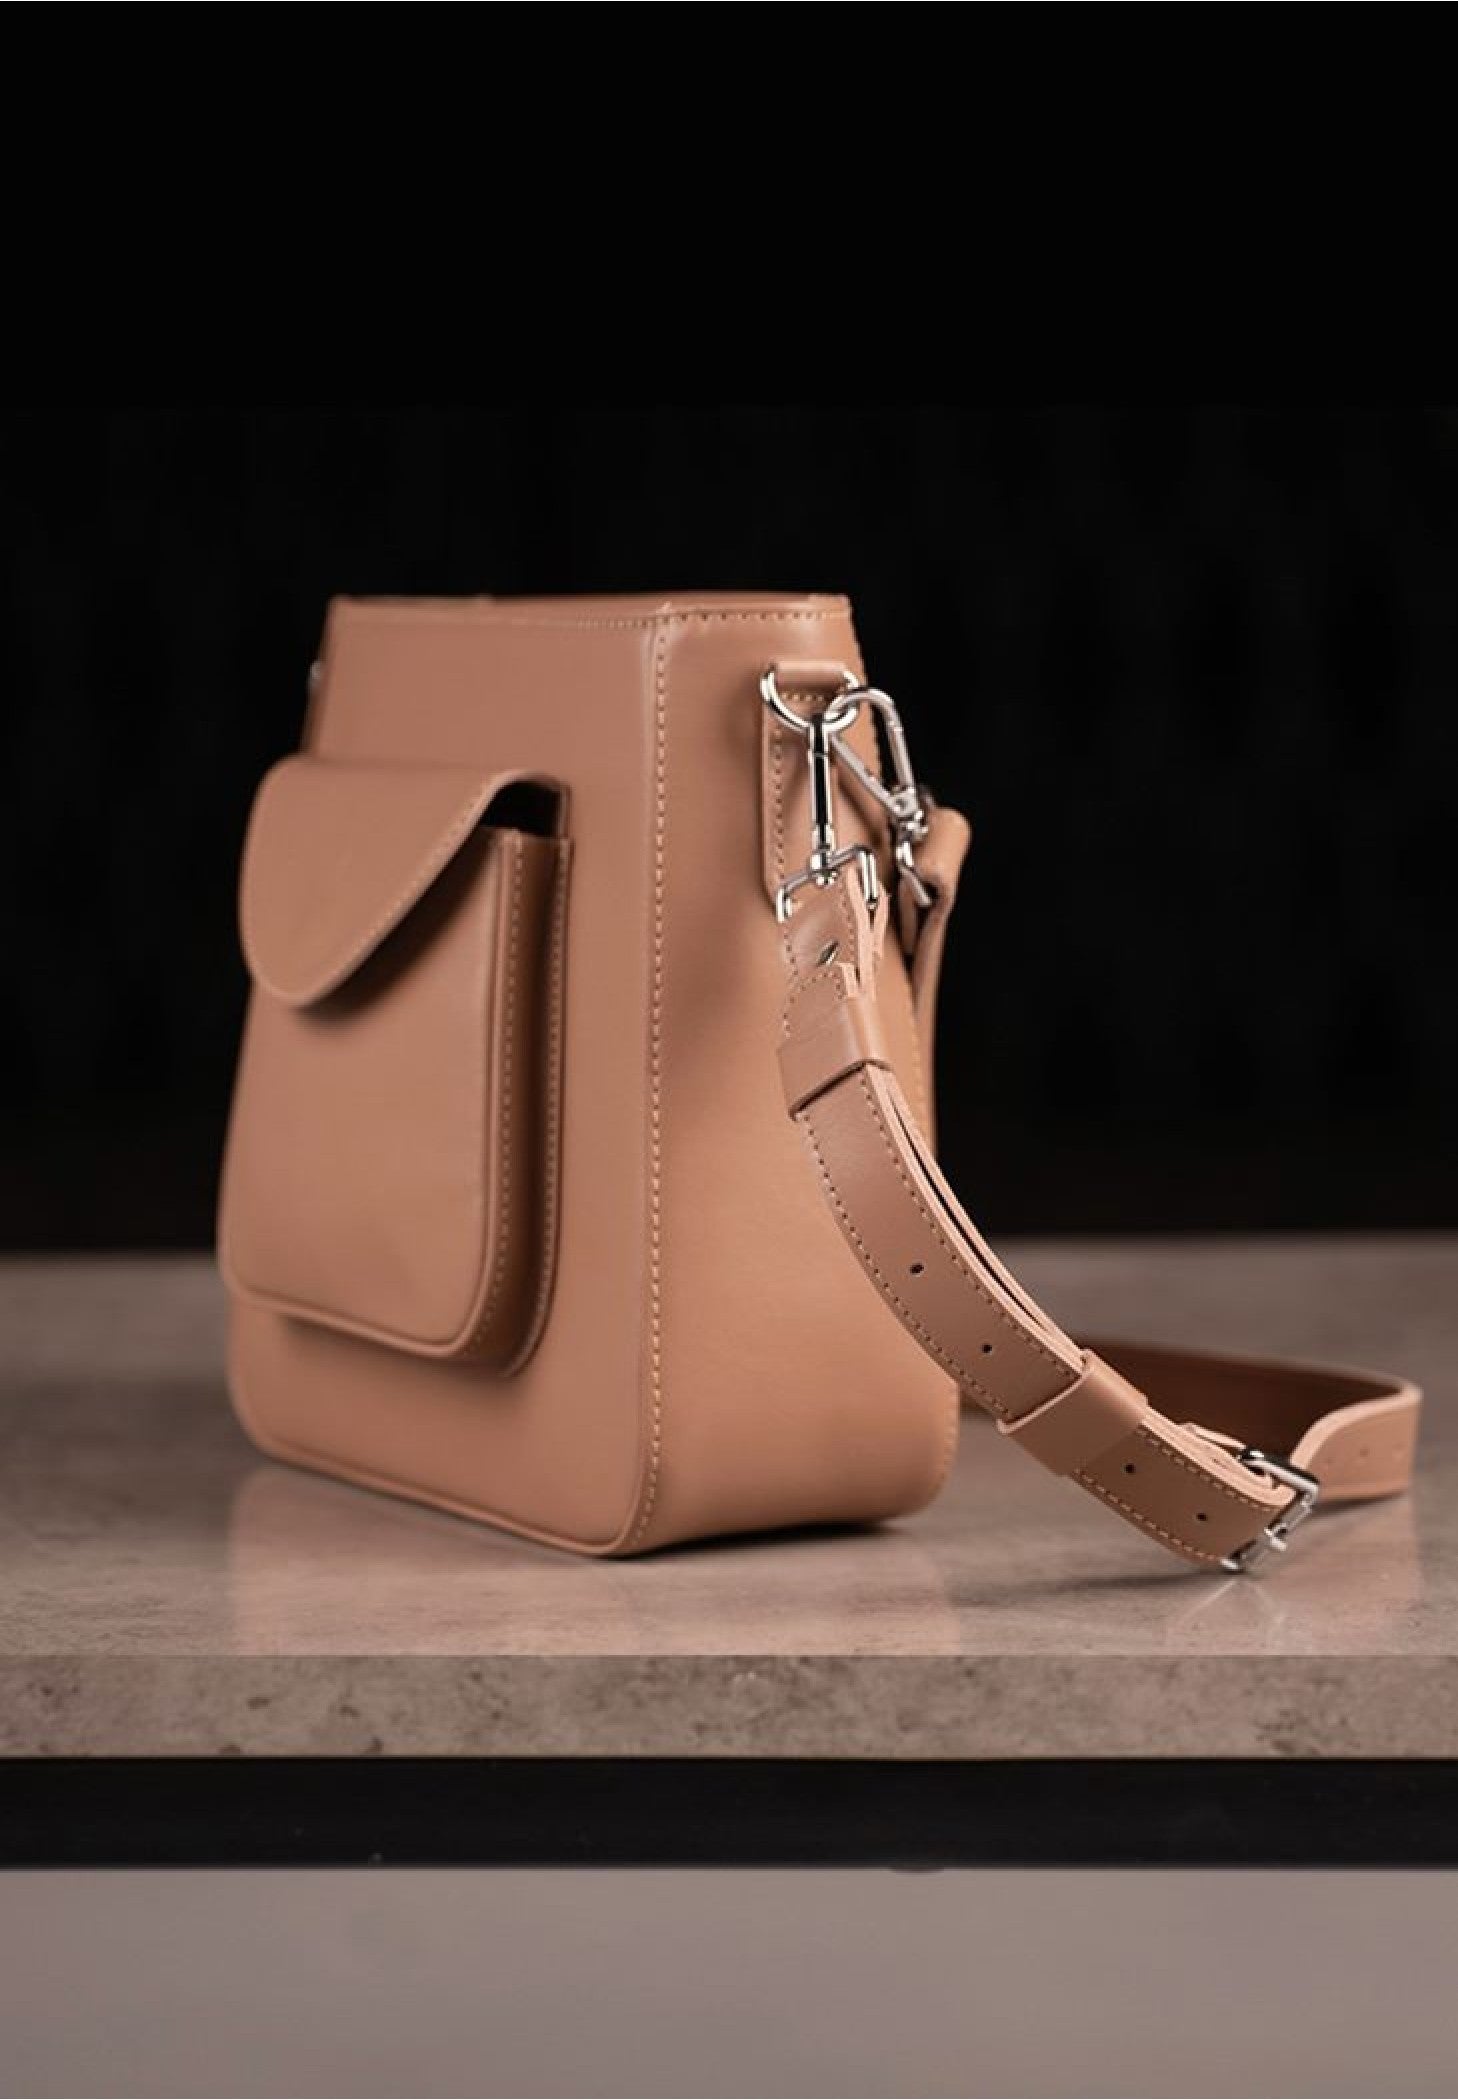 caramel leather mid-sized bag for women